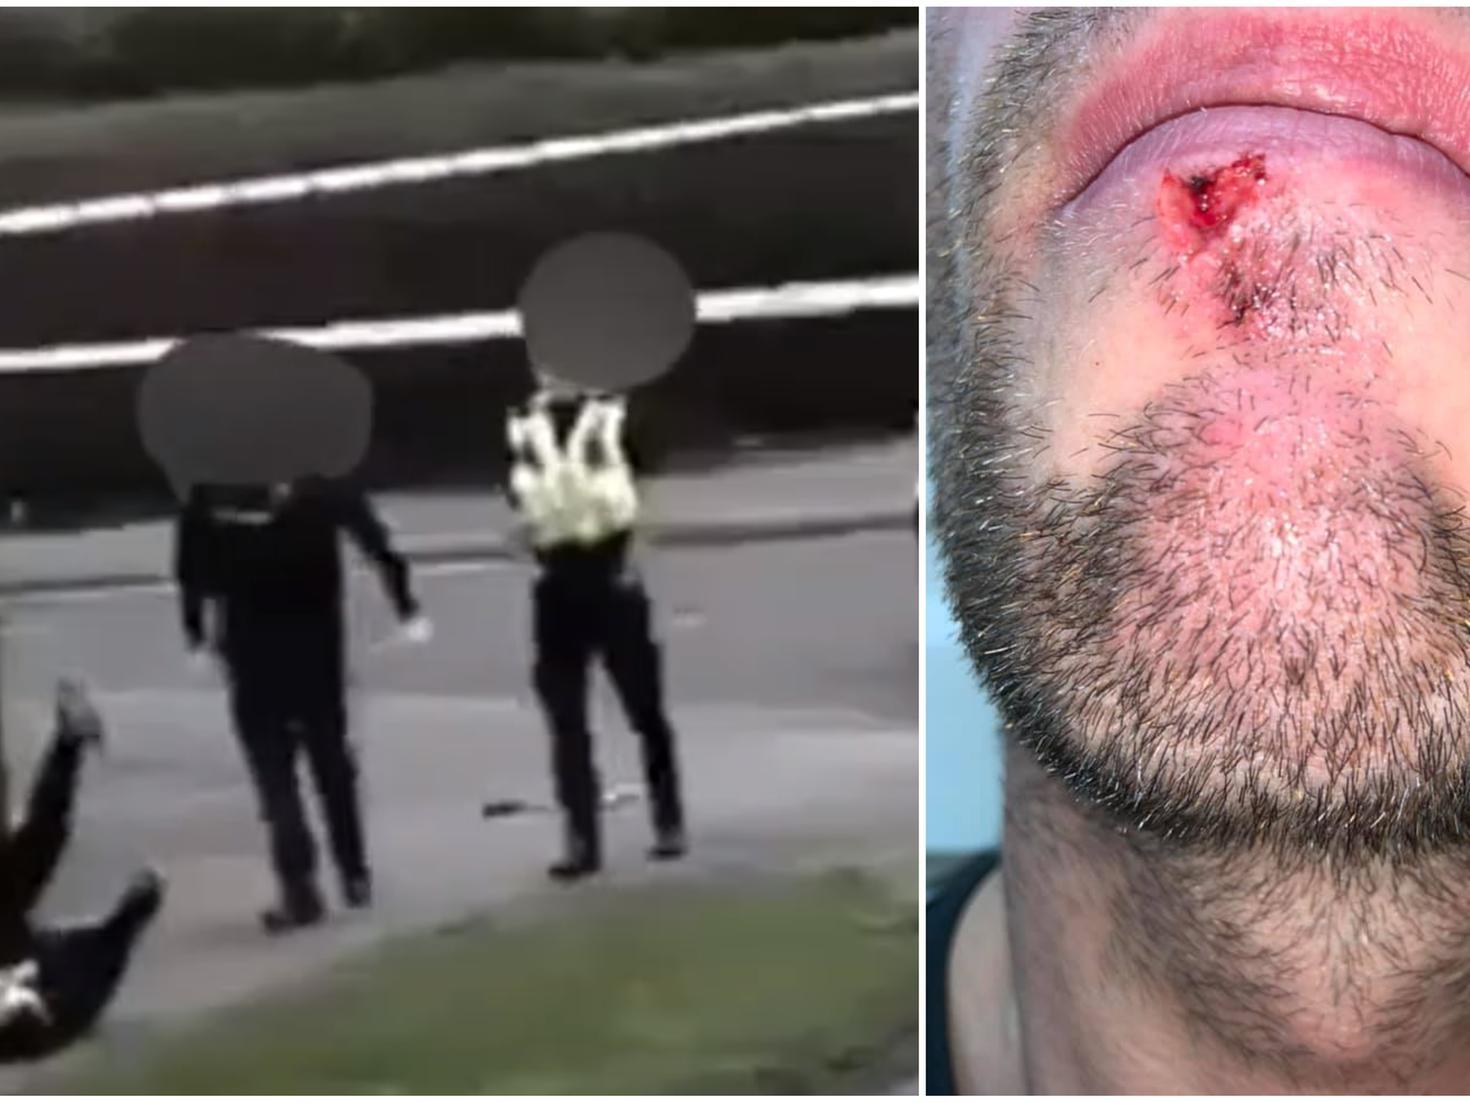 David Baldwin, 31, claims he was pushed to the ground, hit and grabbed around the throat by a West Yorkshire Police officer while filming an incident in Seacroft on Saturday